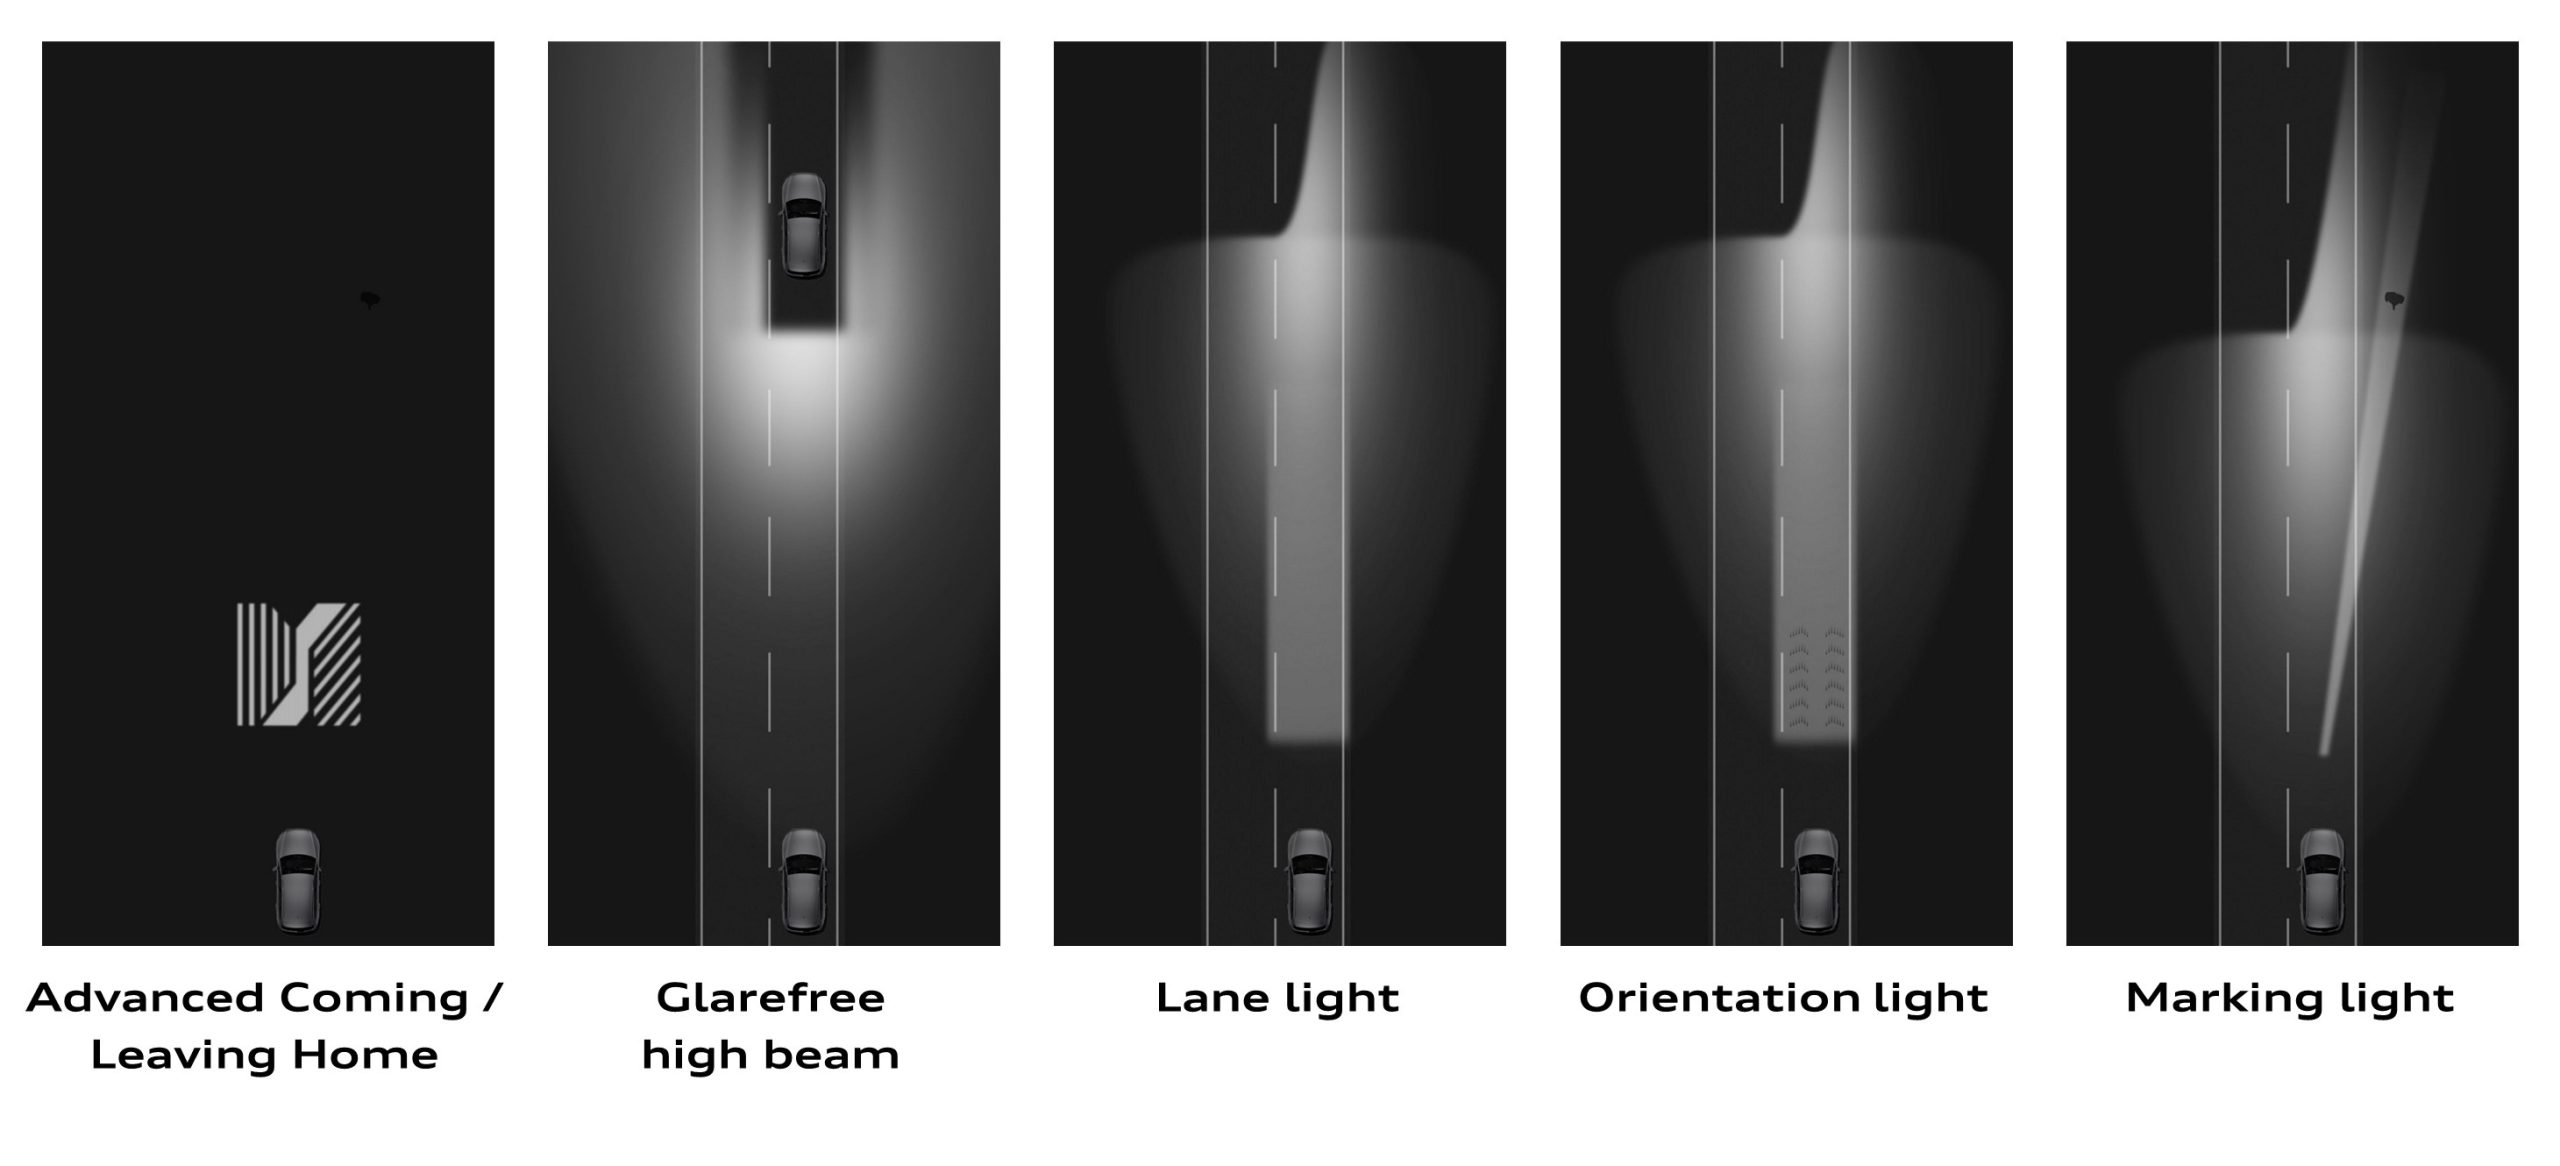 Adaptive Driving Beam Headlamp Systems May Be Coming to U.S. Roads